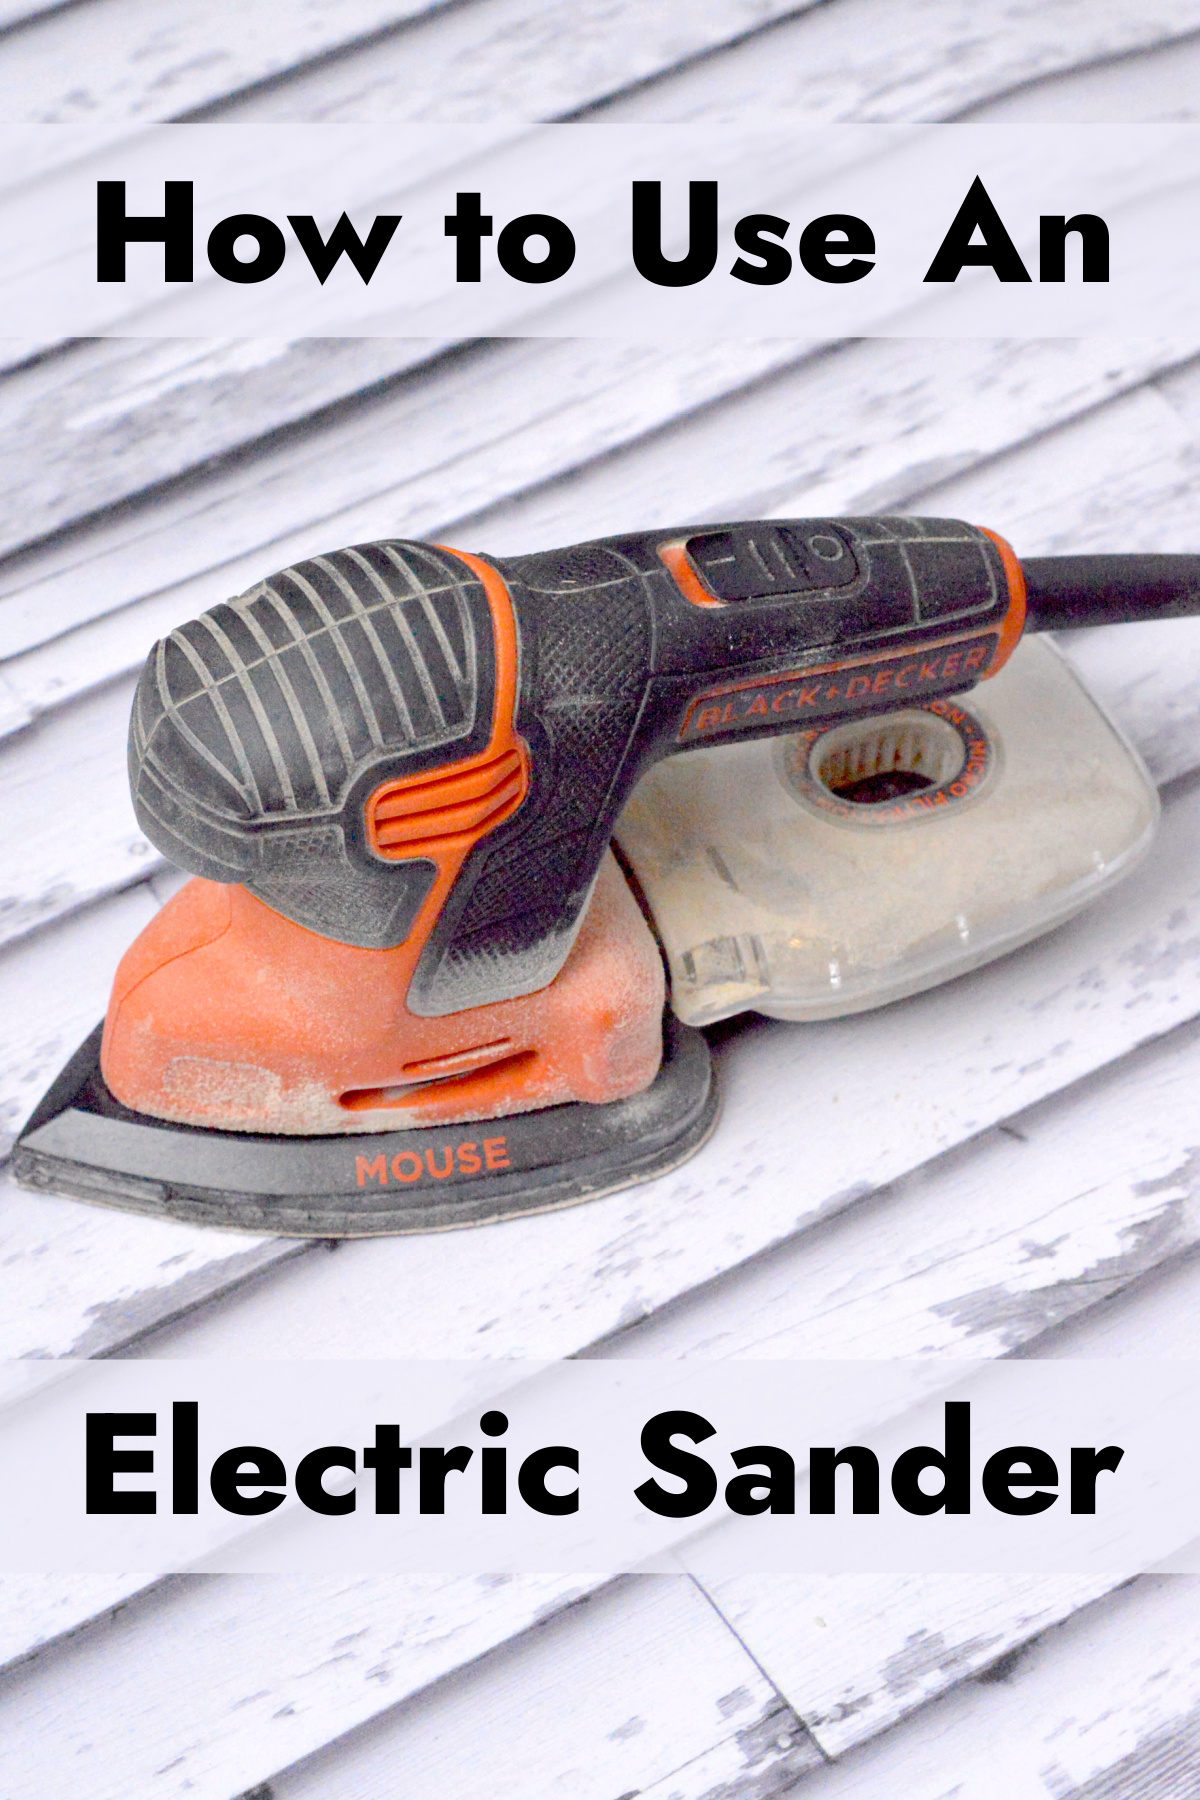 How to Use an Electric Sander